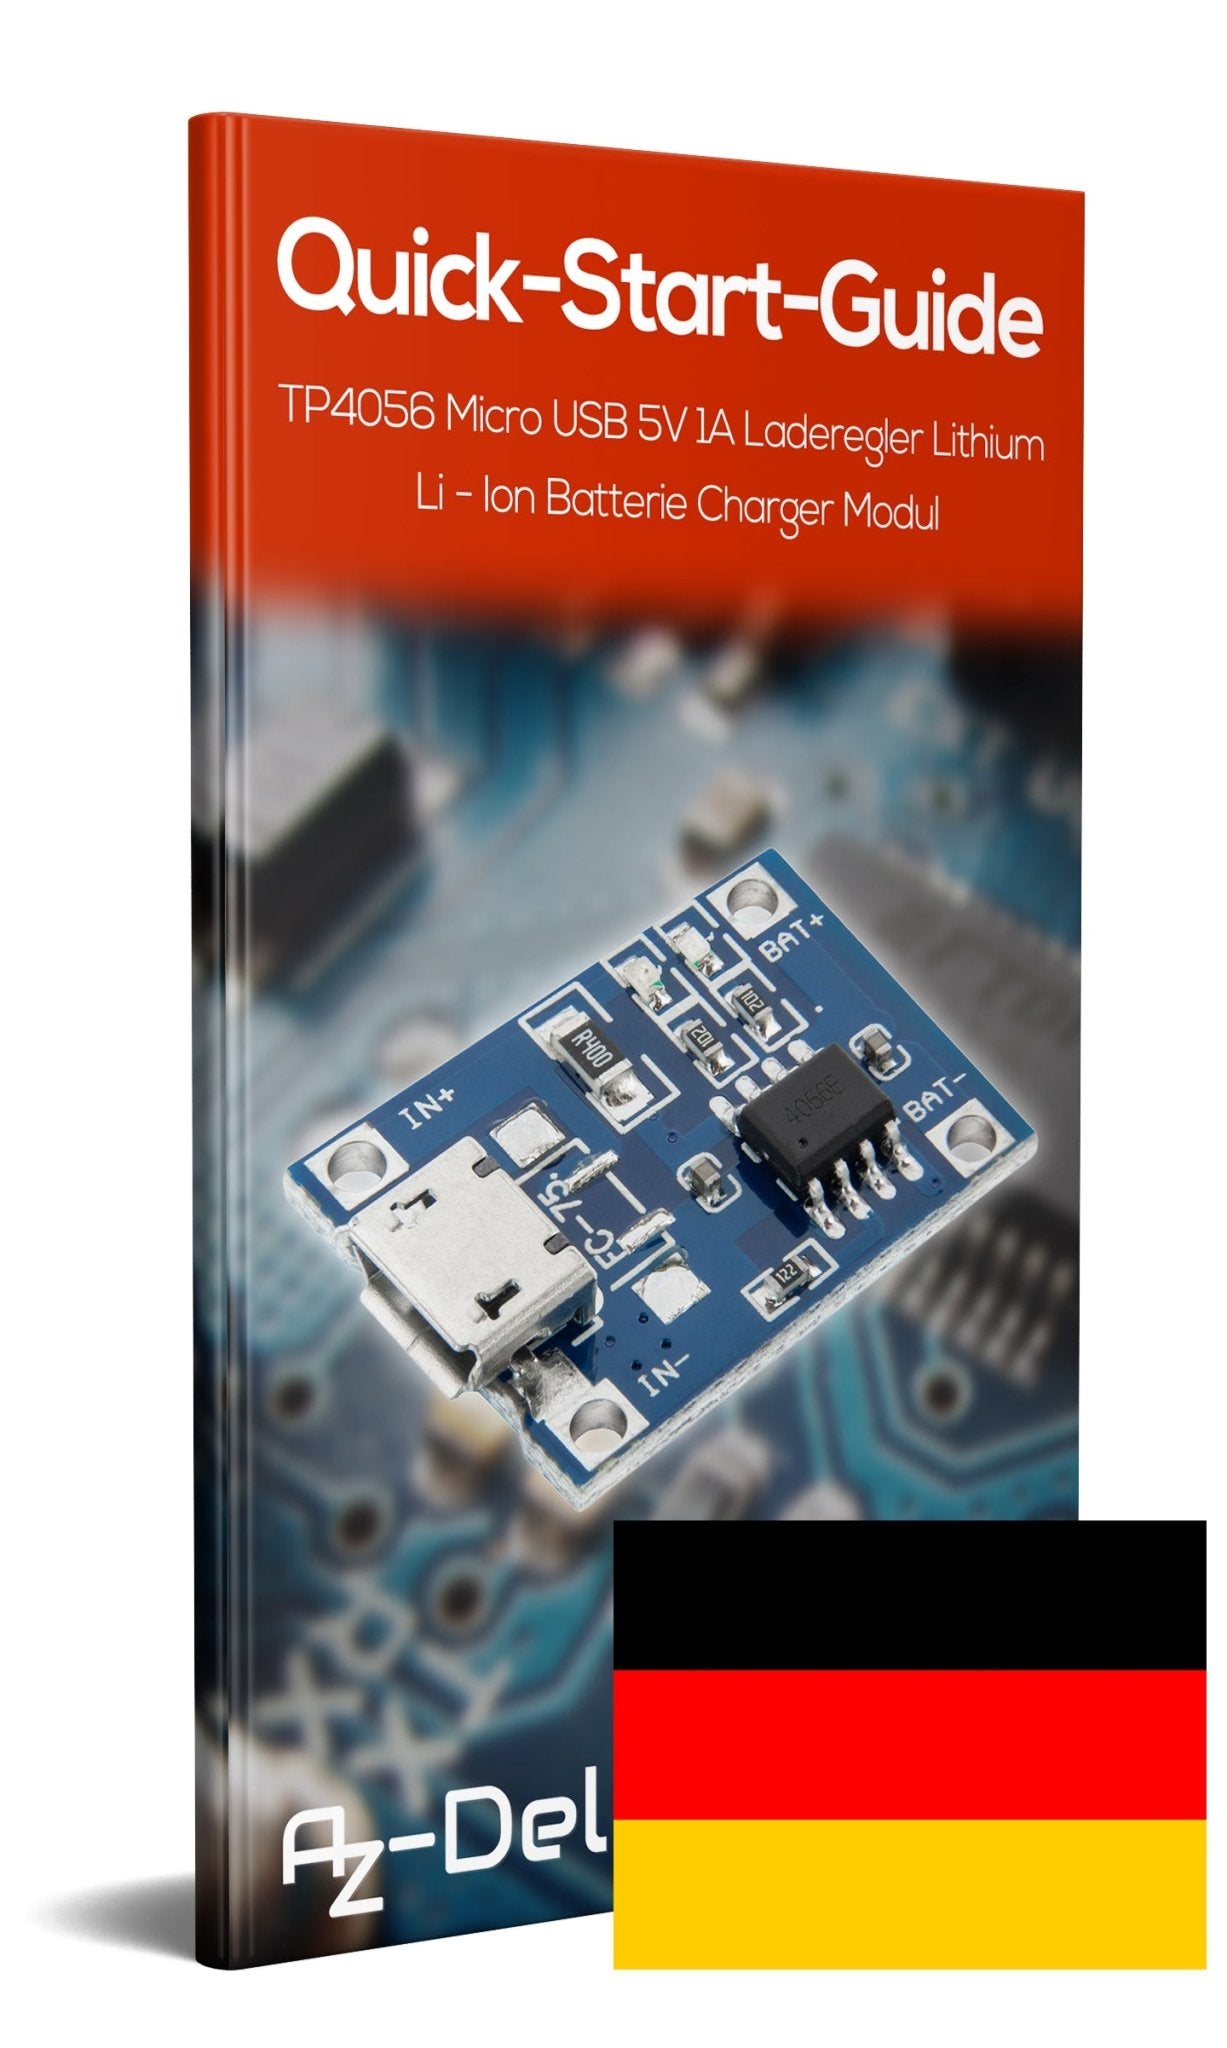 TP4056 Micro USB 5V 1A Laderegler Lithium Li - Ion Batterie Charger Modul - AZ-Delivery